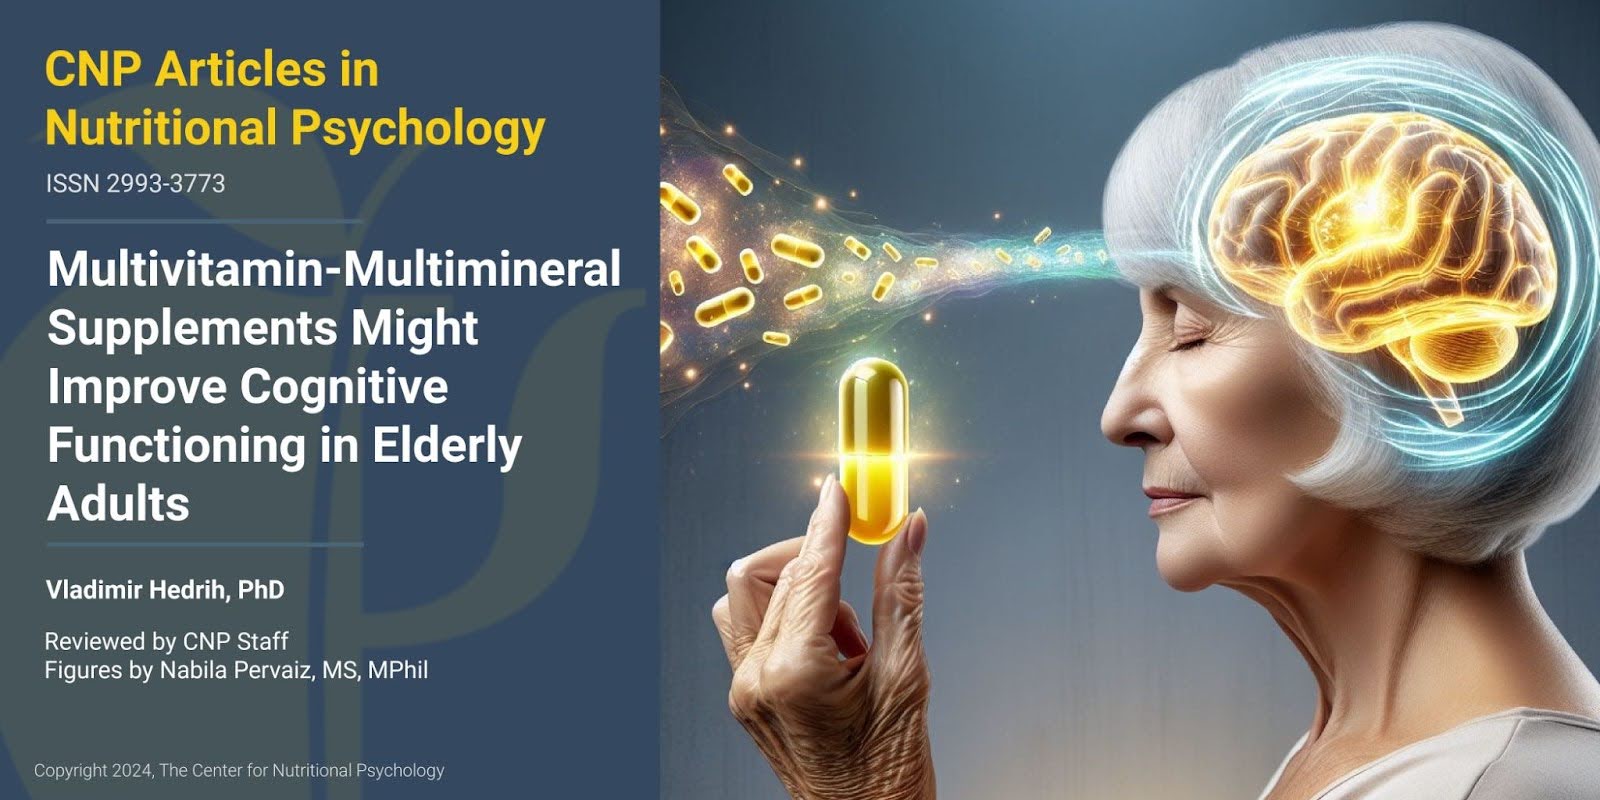 Multivitamin-Multimineral Supplements Might Improve Cognitive Functioning in Elderly Adults